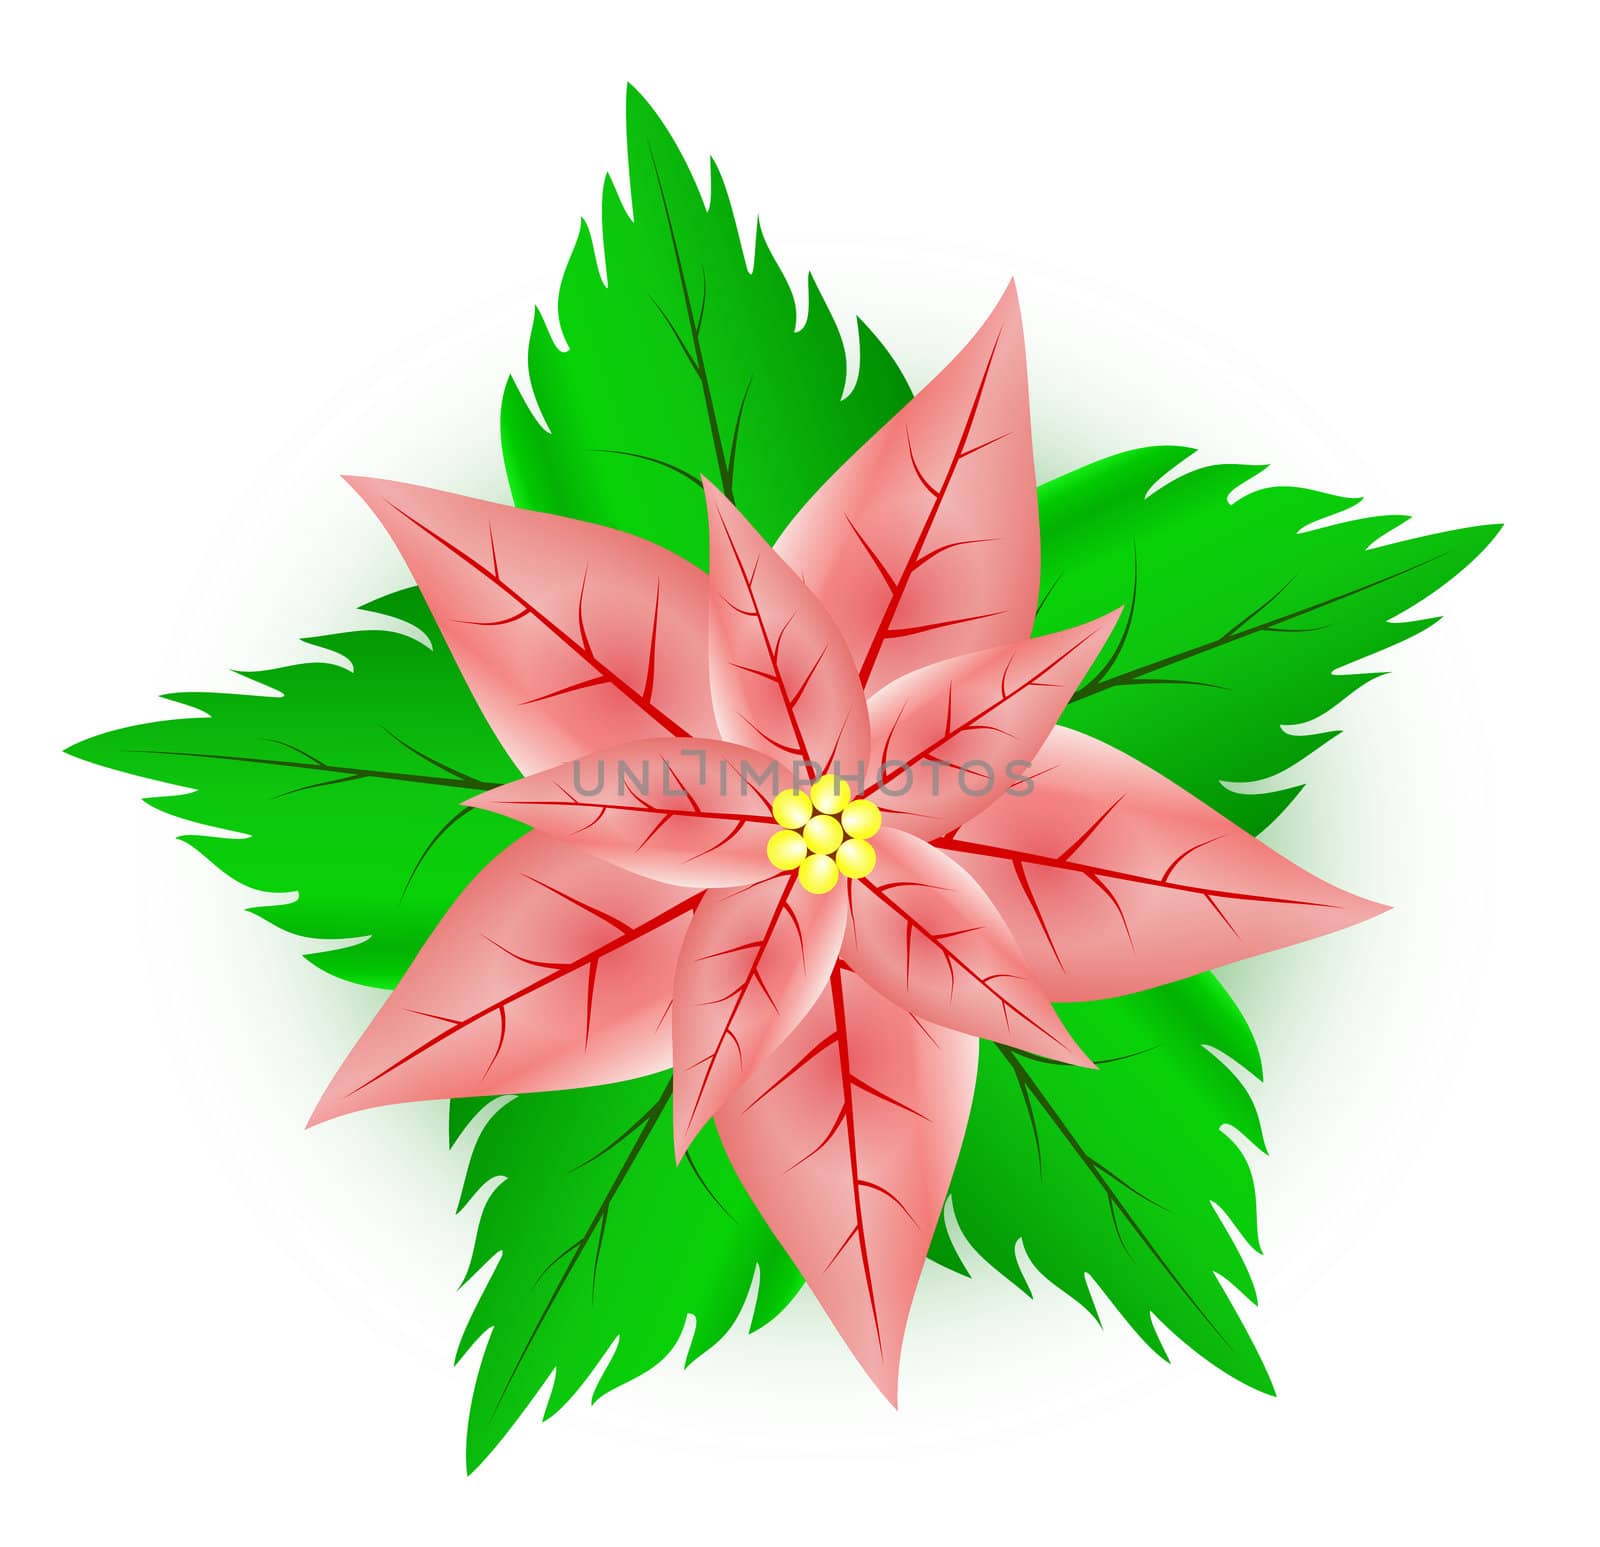 Illustration of a  poinsettia flower which is used in Christmas decoration